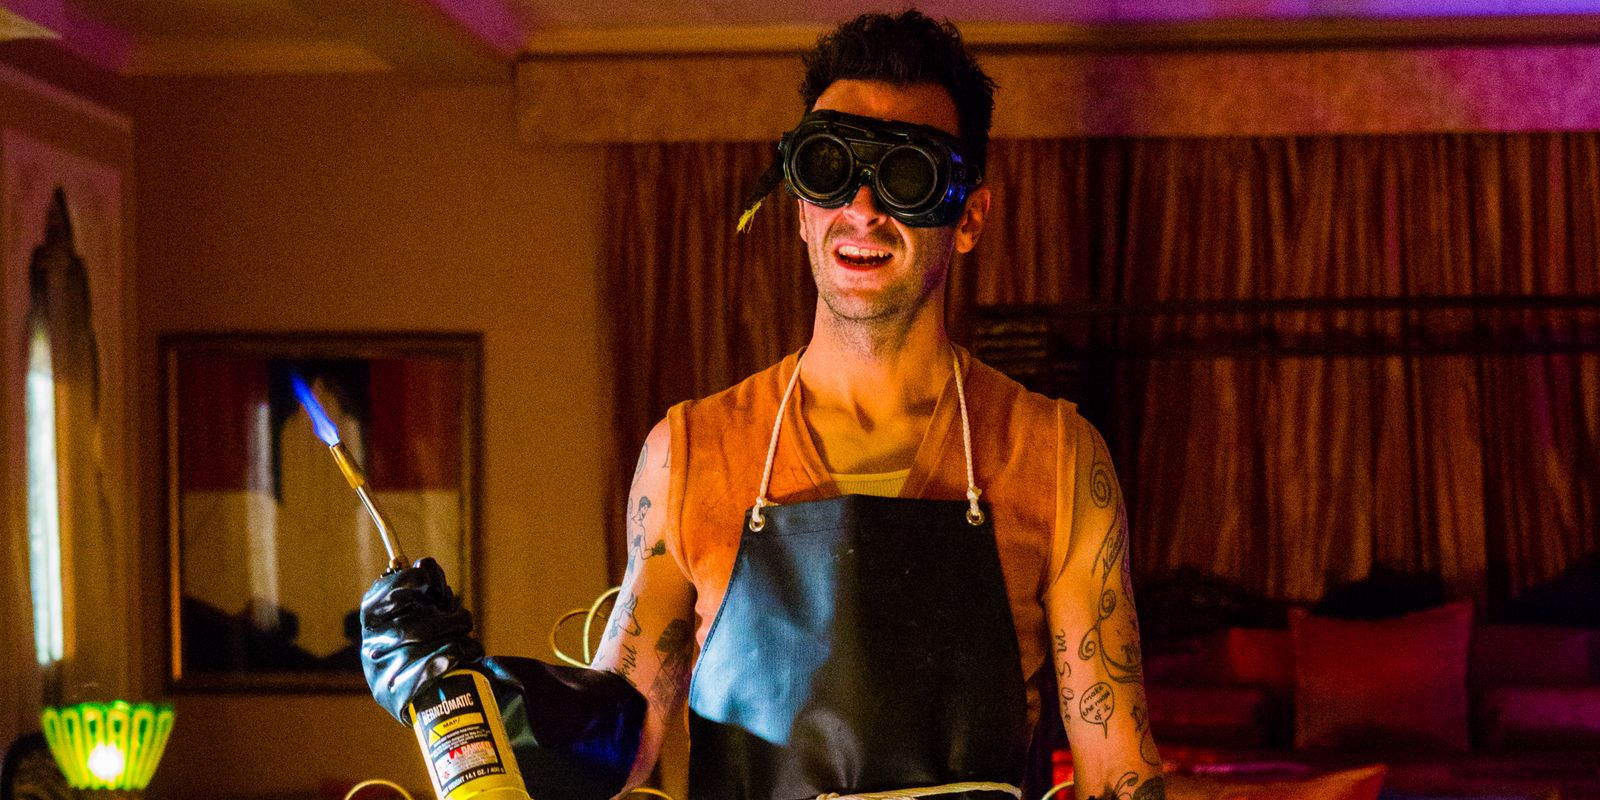 Preacher Keeps Its Foot on the Accelerator In An Action-Packed Episode 2